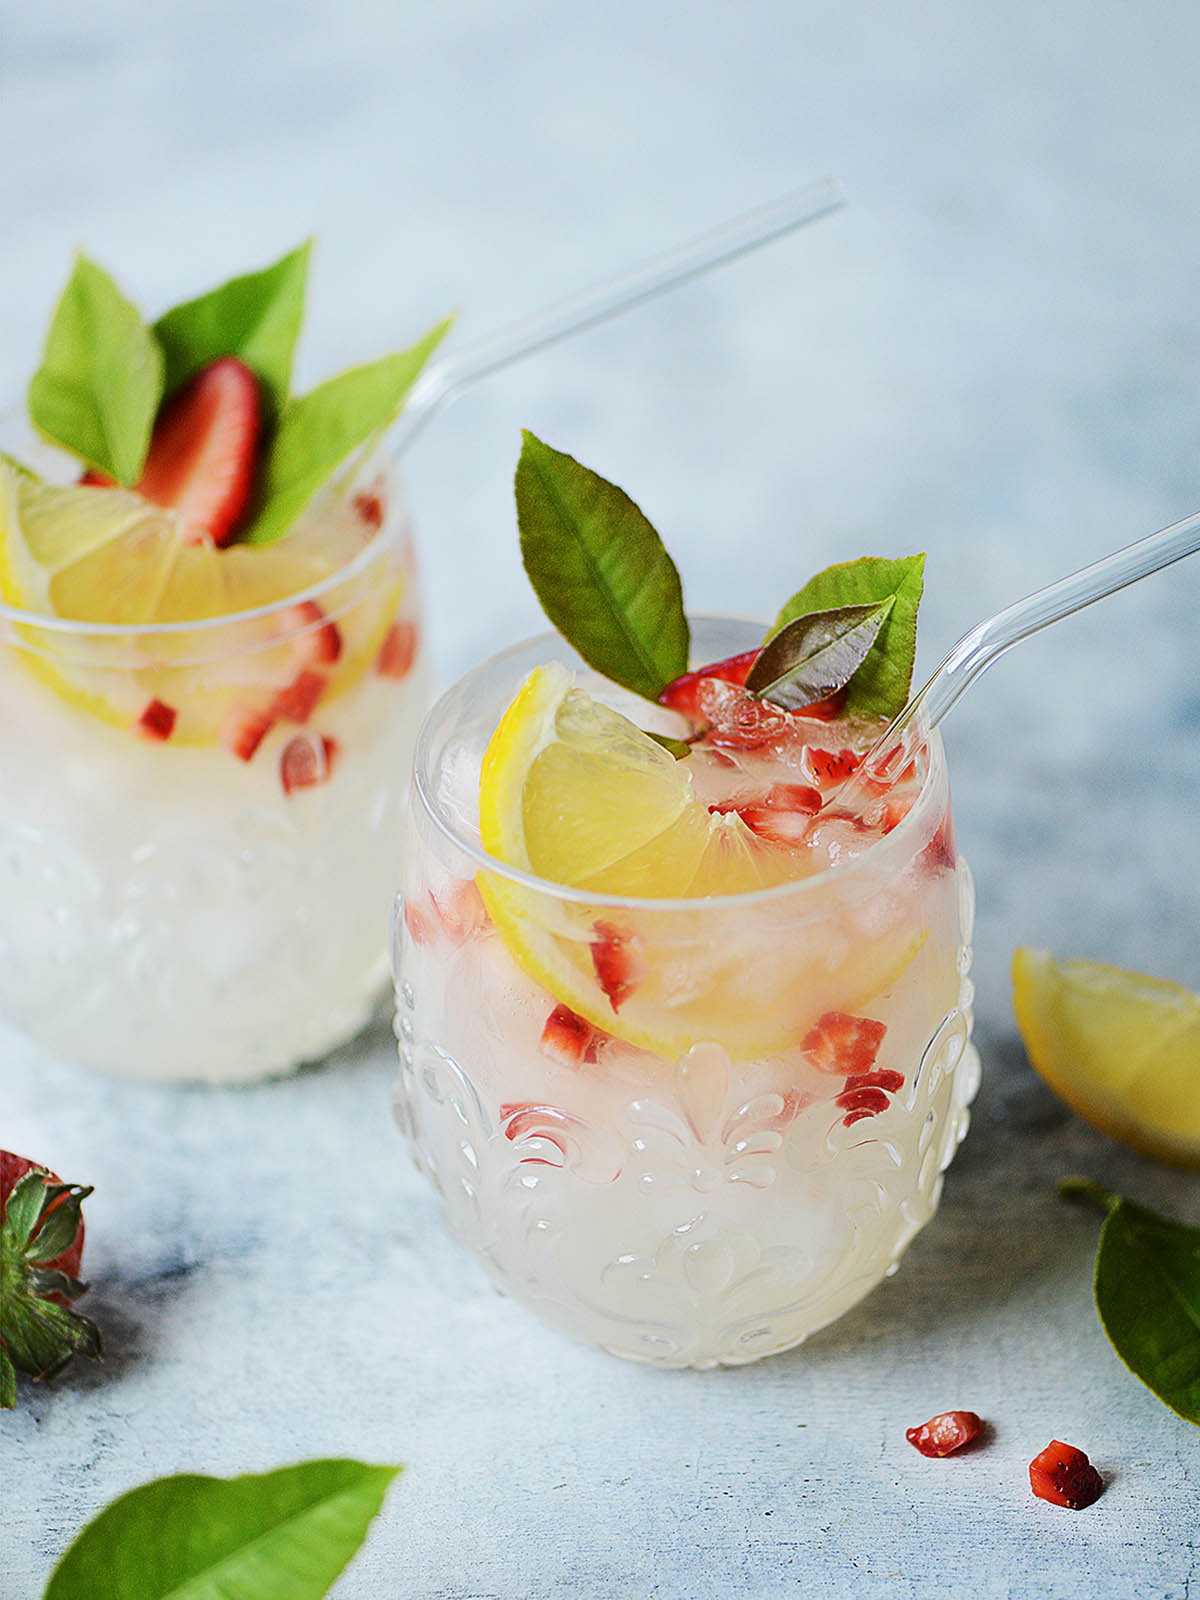 Two glasses with lemonade garnished with chopped strawberries.